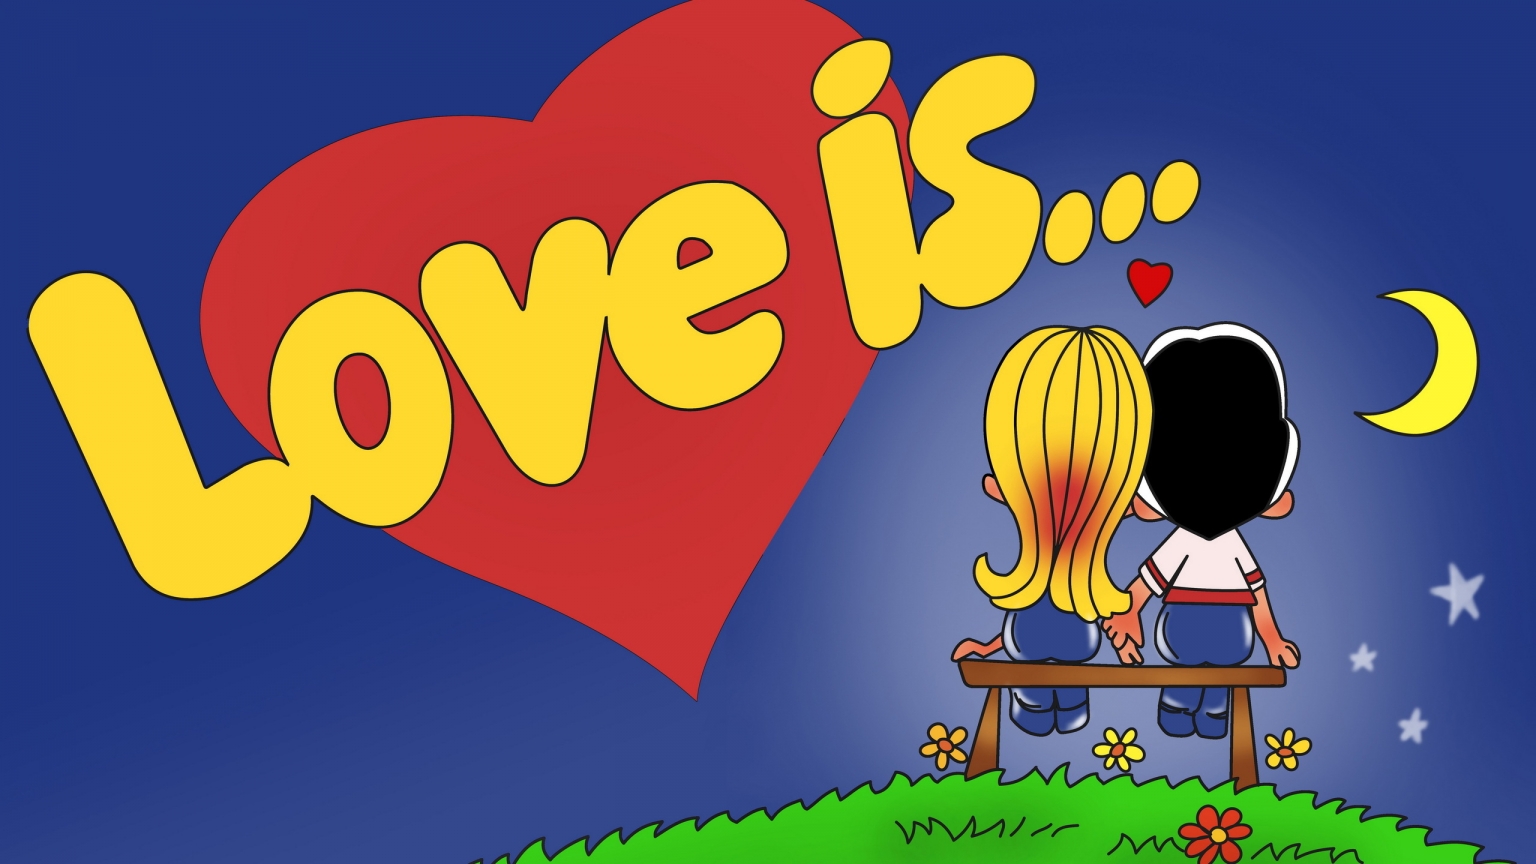 Love is for 1536 x 864 HDTV resolution